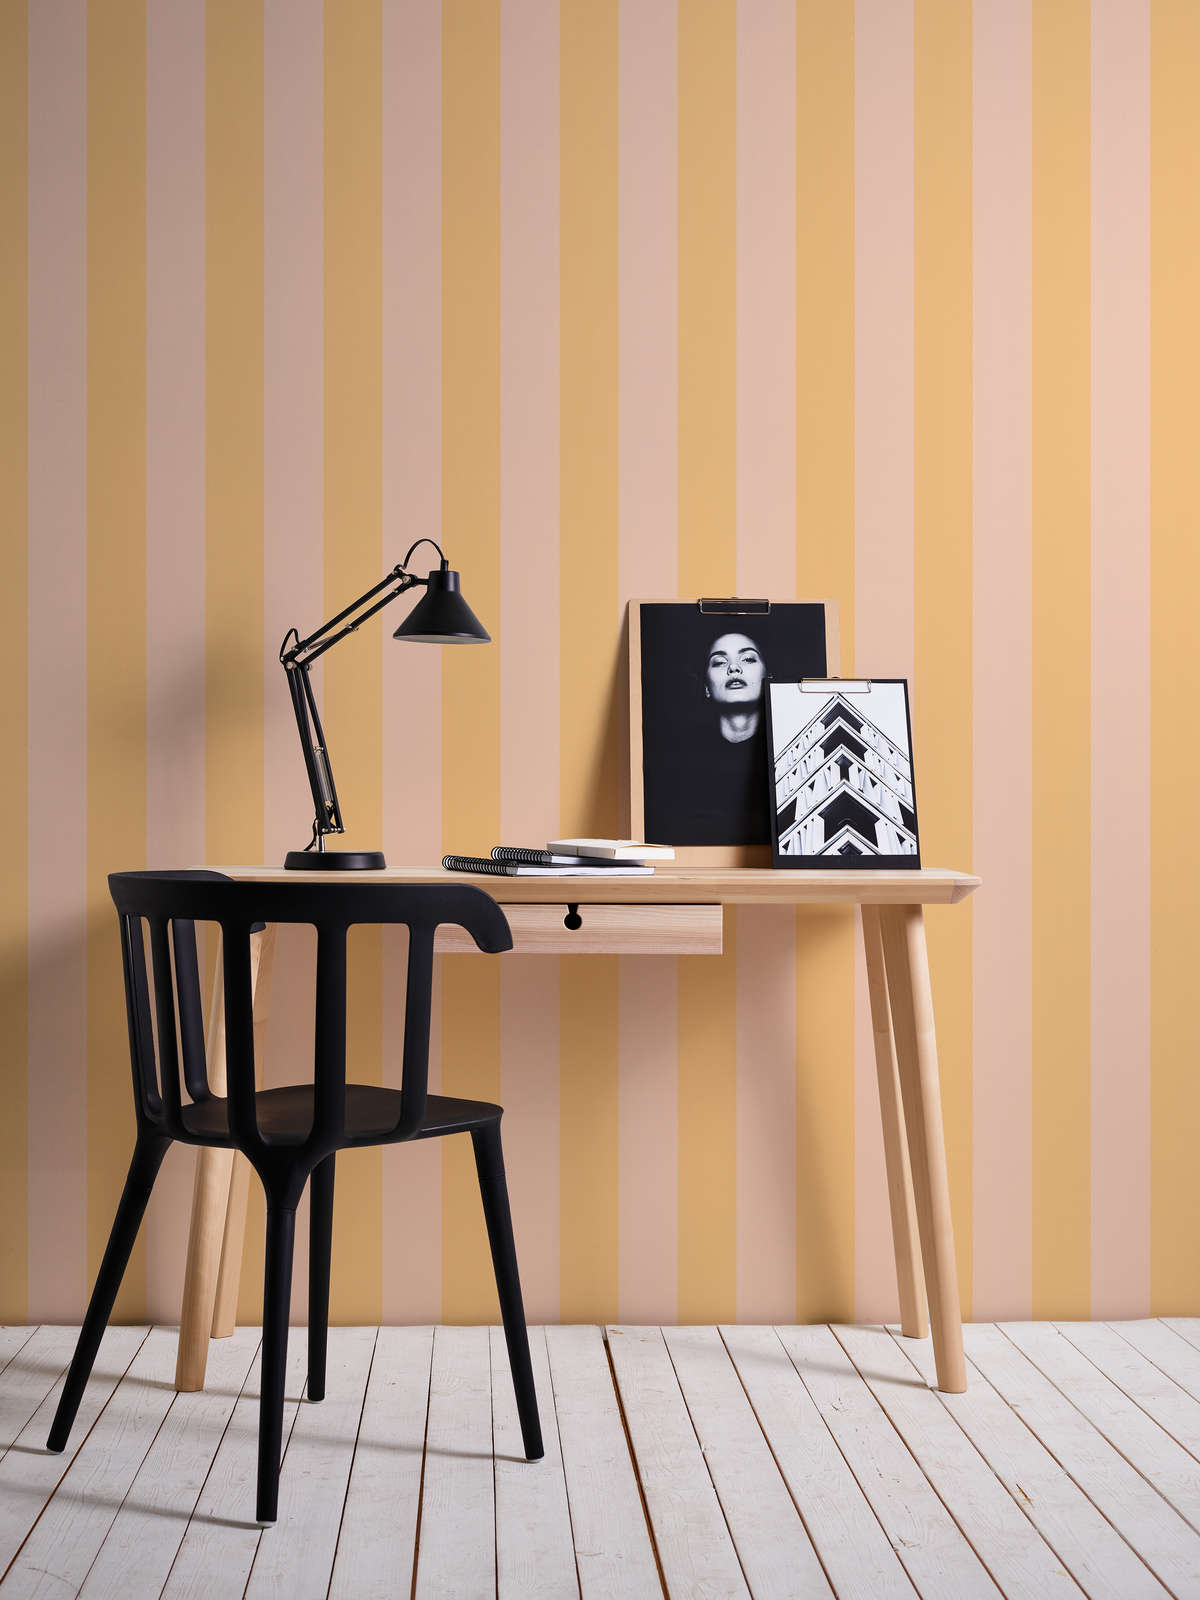             Non-woven wallpaper with block stripes in soft shades - orange, pink
        